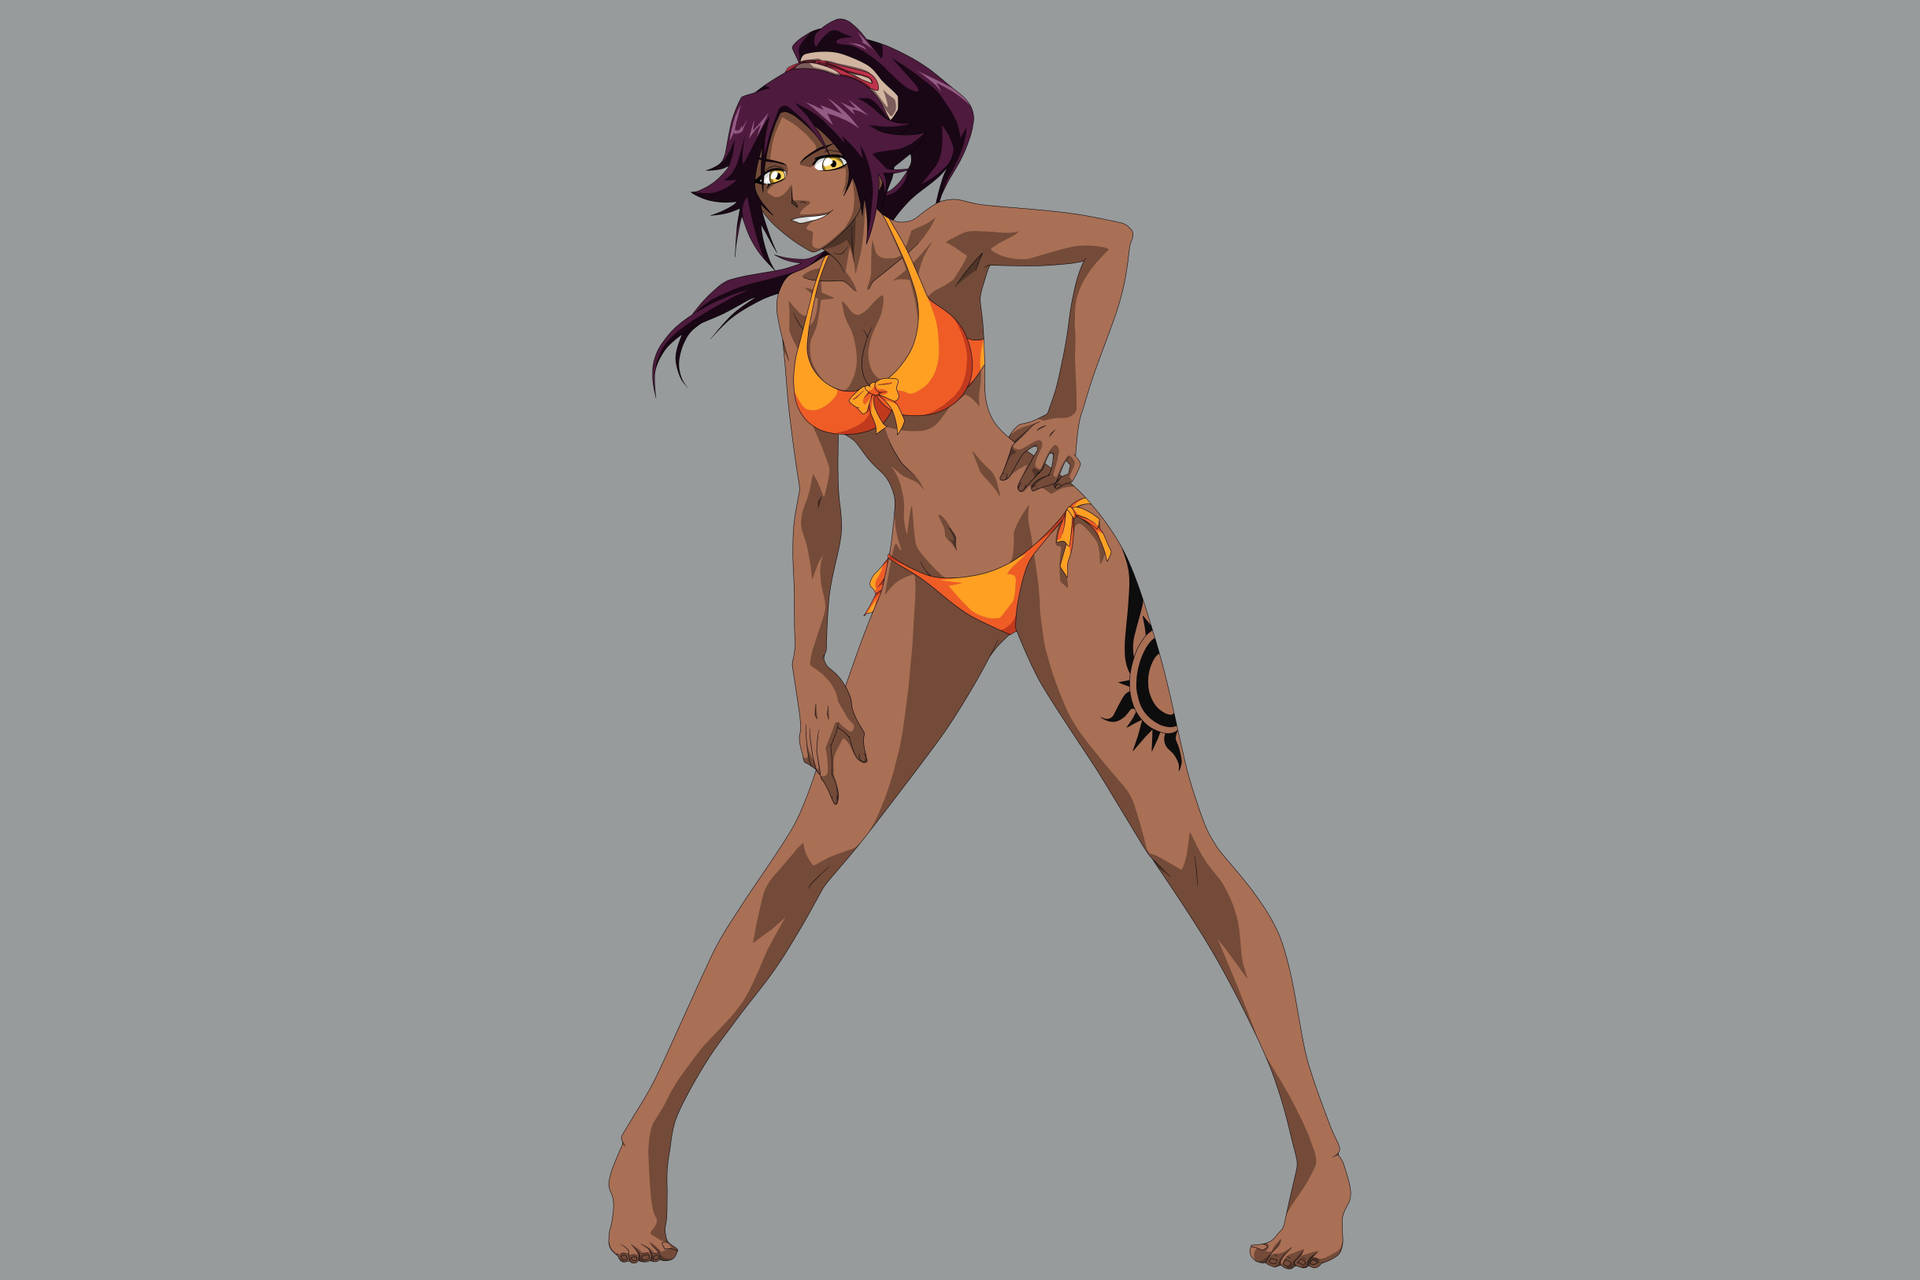 Caption: Yoruichi Shihouin In Swimwear - Revealing The Power And Beauty Of Stealth Background